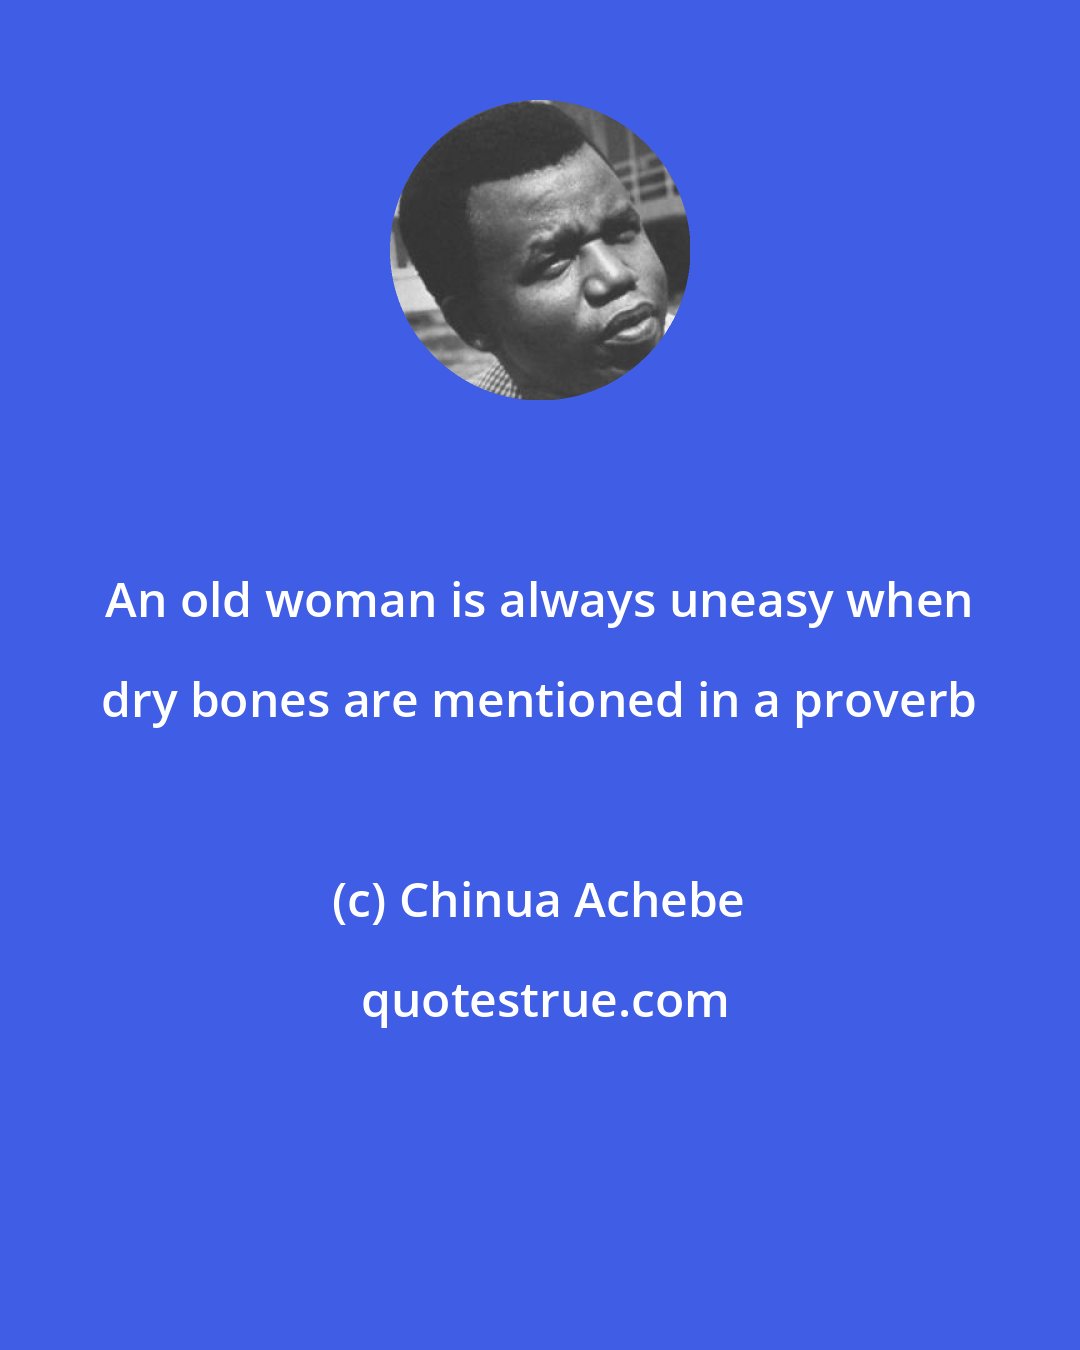 Chinua Achebe: An old woman is always uneasy when dry bones are mentioned in a proverb